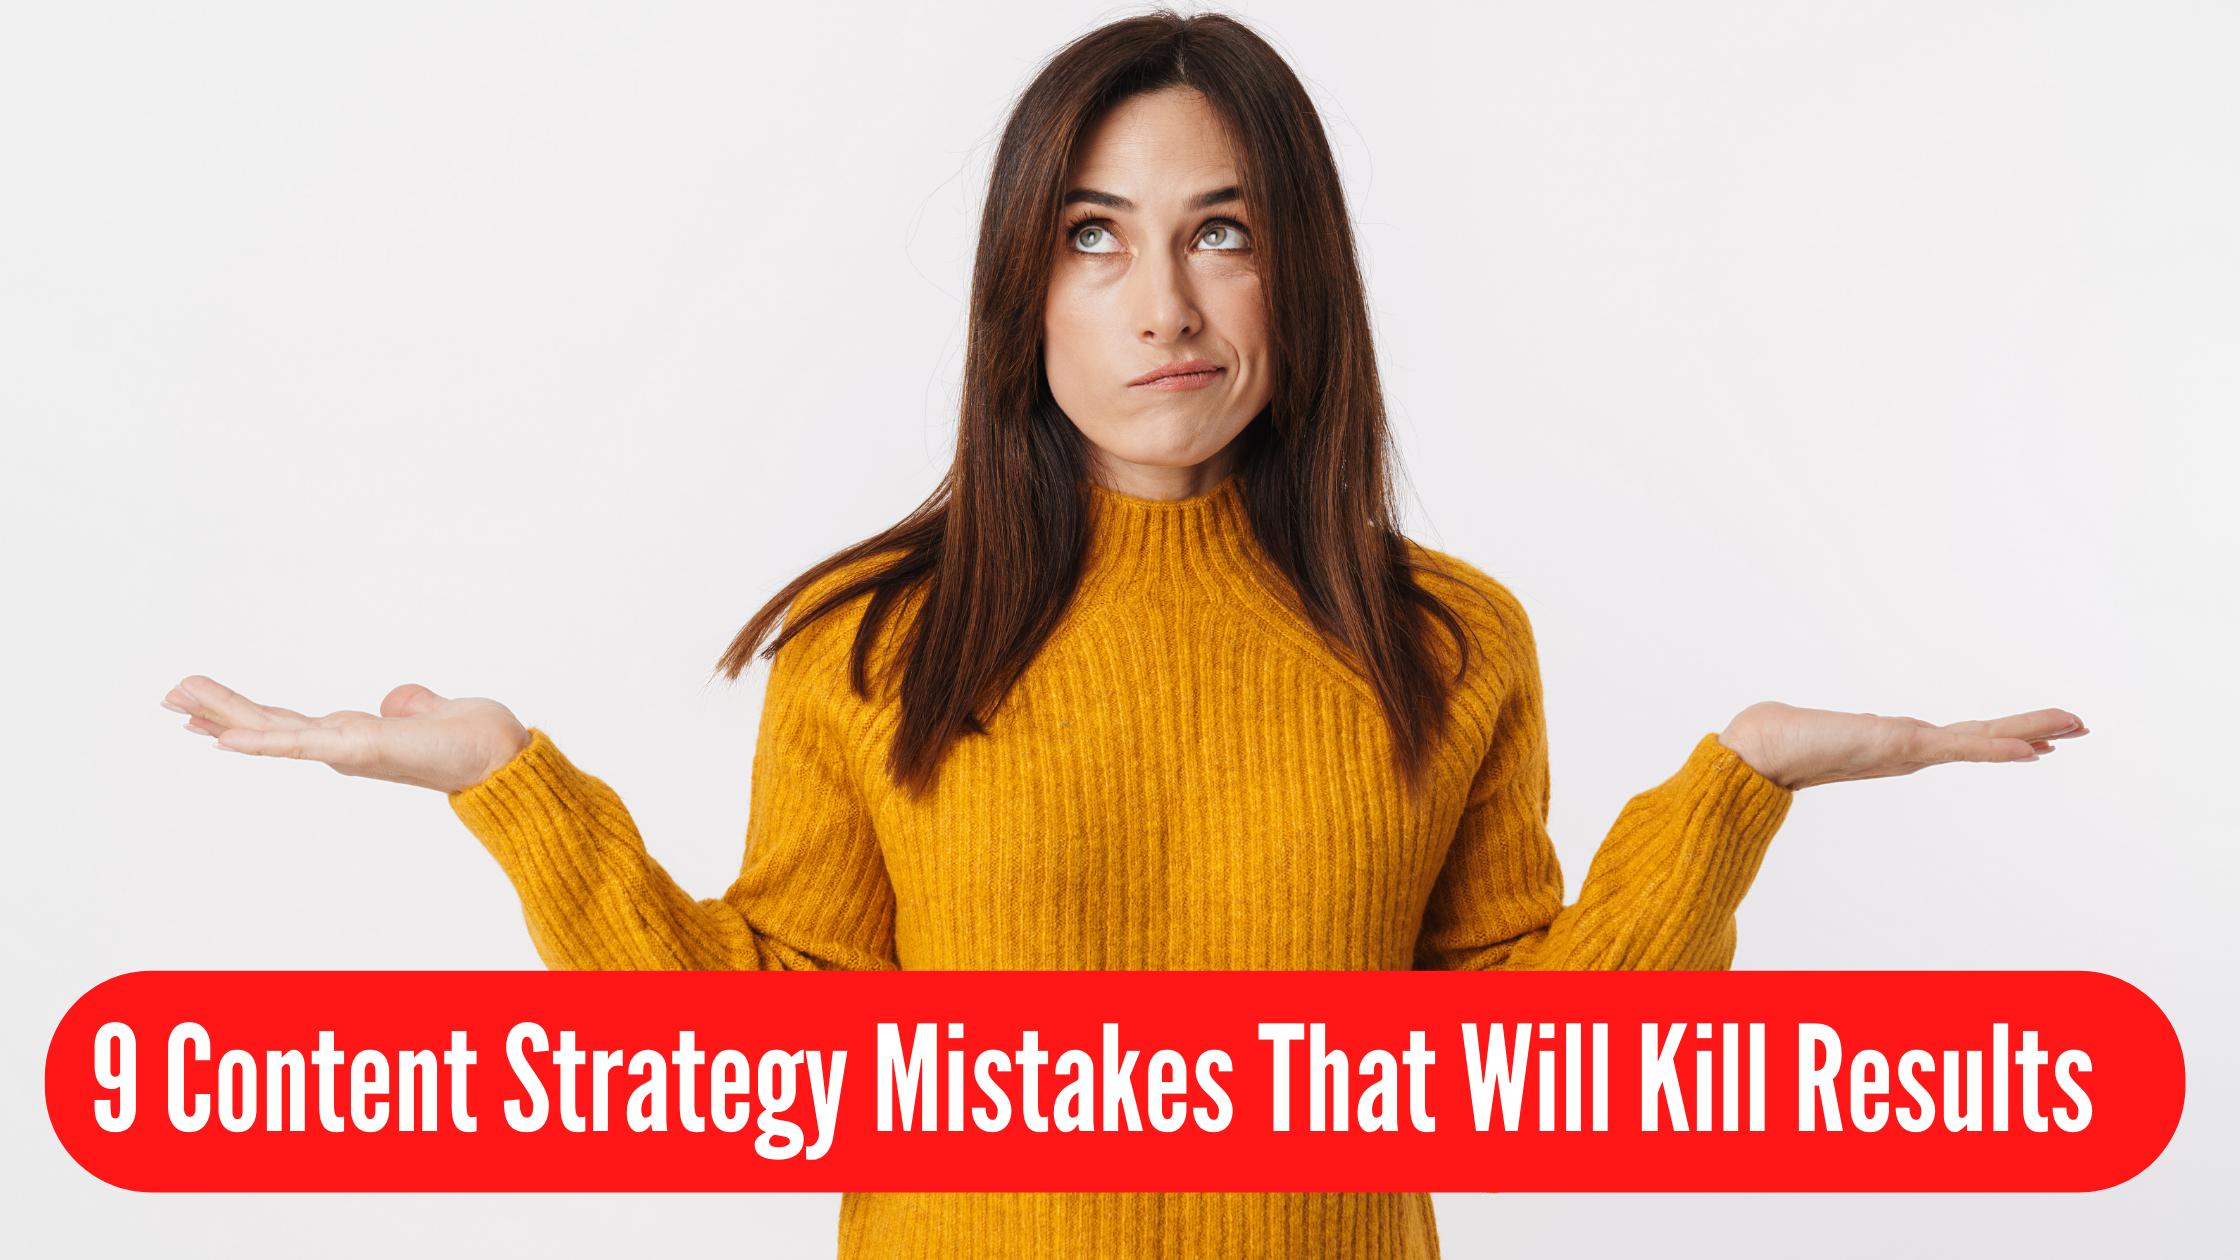 9 Content Strategy Mistakes That Will Kill Results